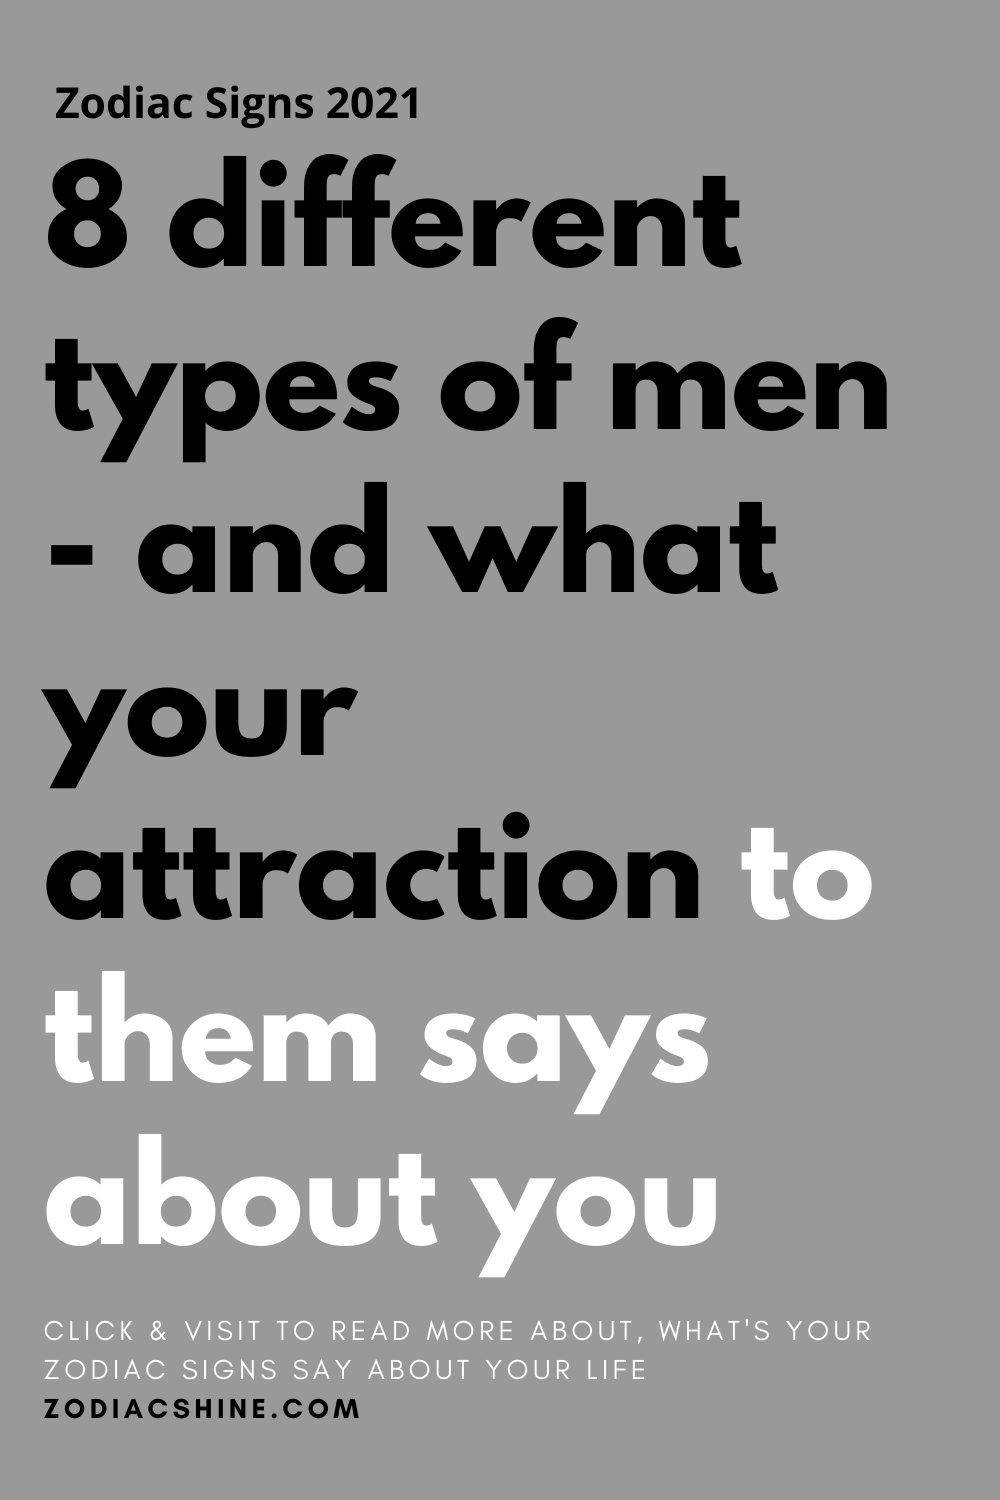 8 different types of men and what your attraction to them says about you